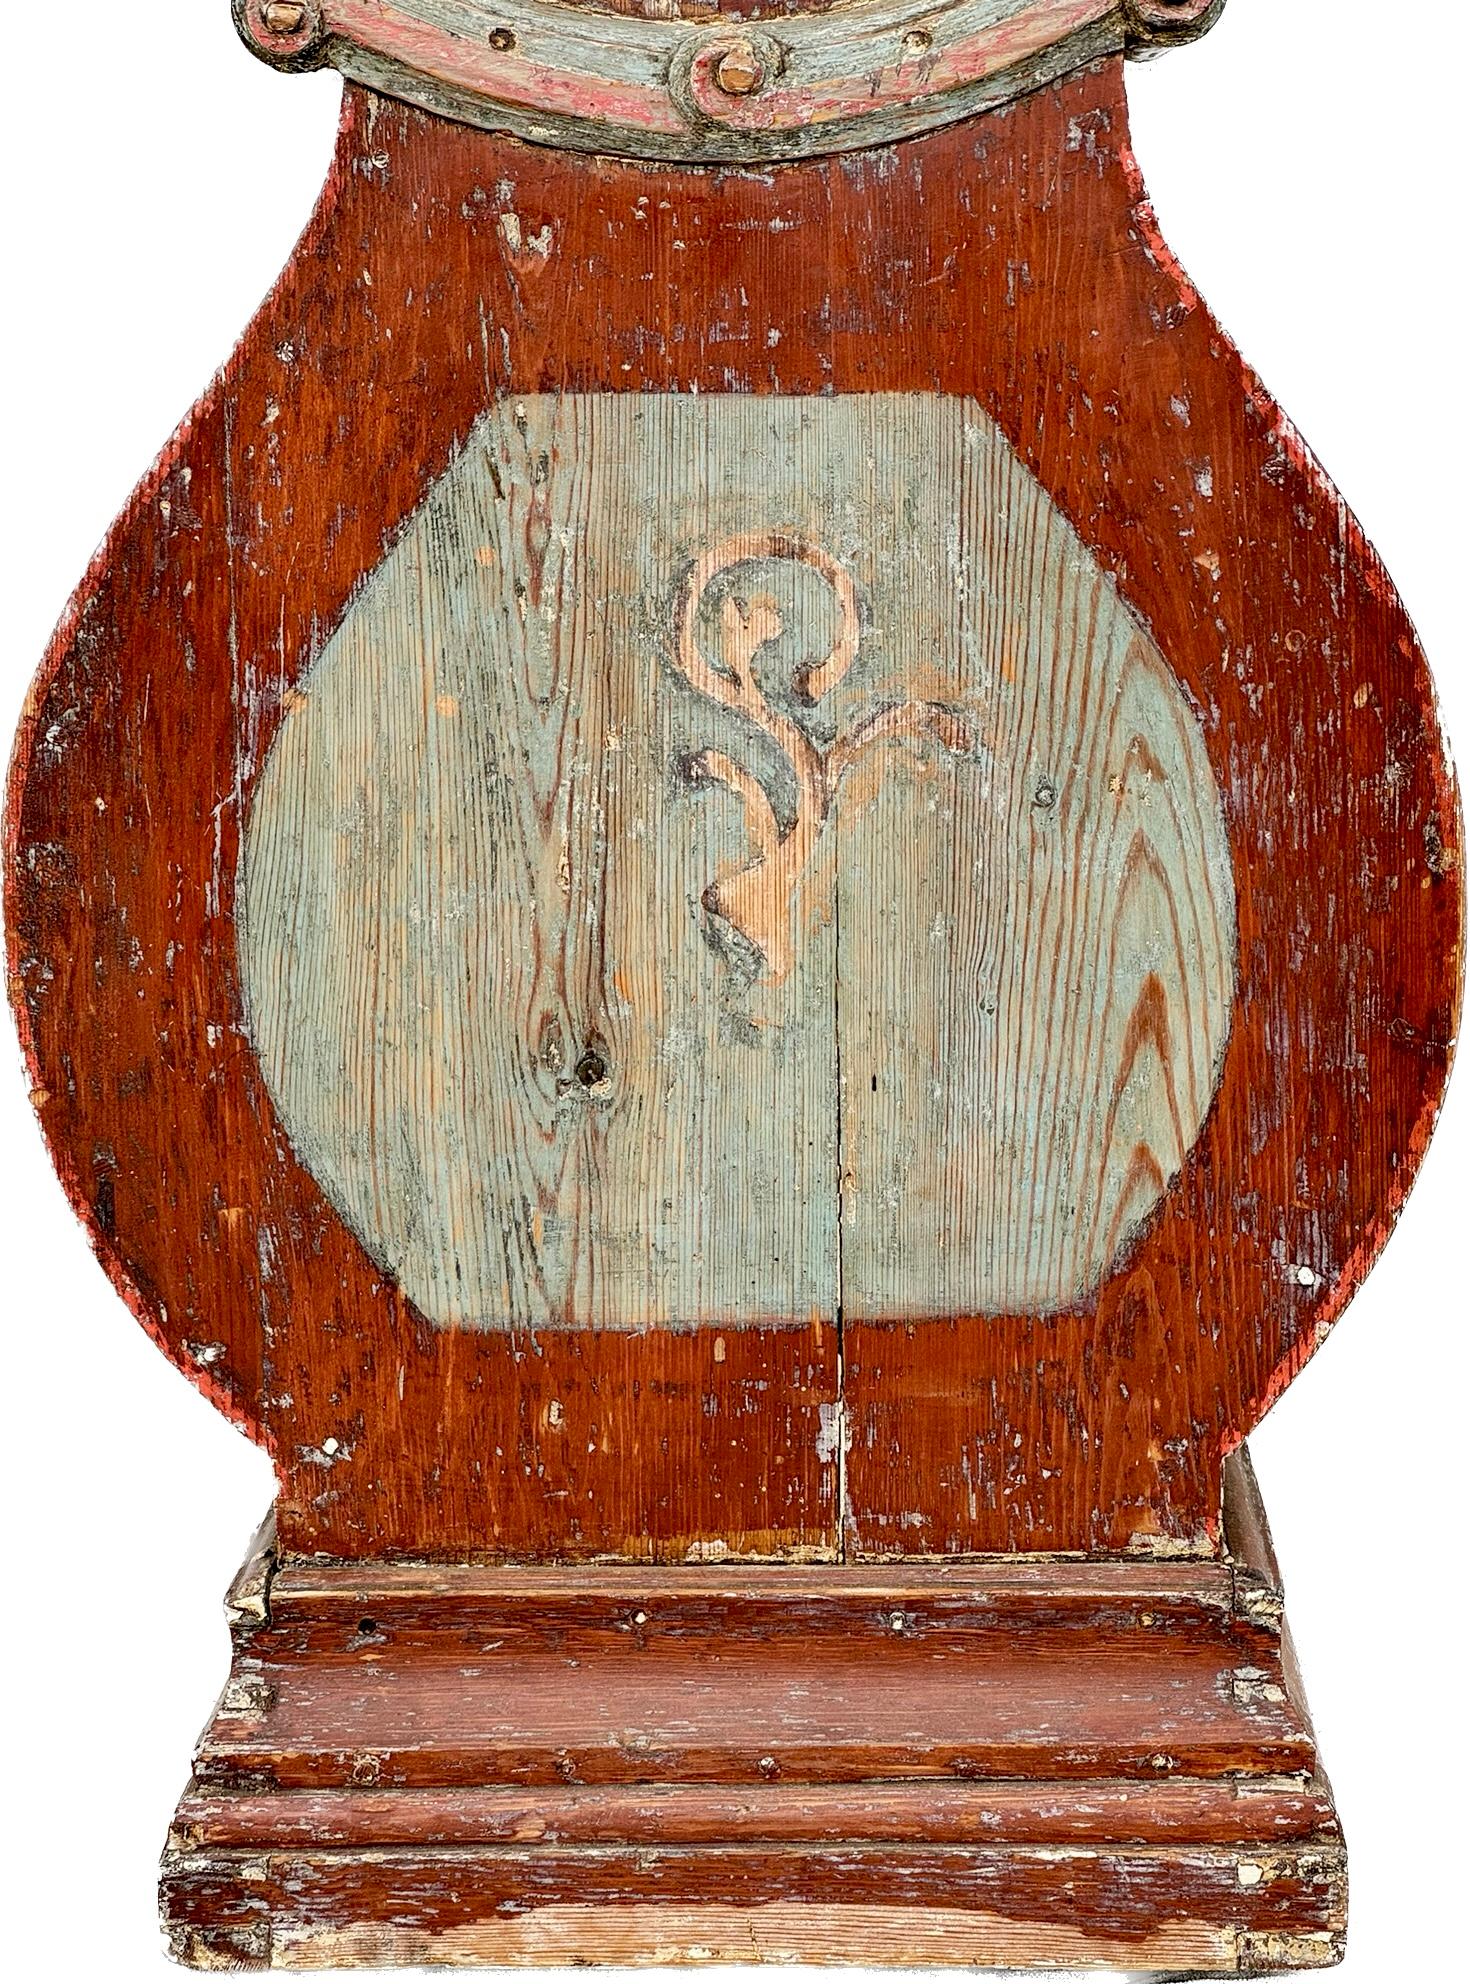 19th century Swedish Painted longcase Mora Clock, Gotland, circa 1820. Features red painted body with blue painted inserts. Clock has a painted tin face with Roman numerals encased by a round bonnet and surmounted by a gilt crest, the baluster case